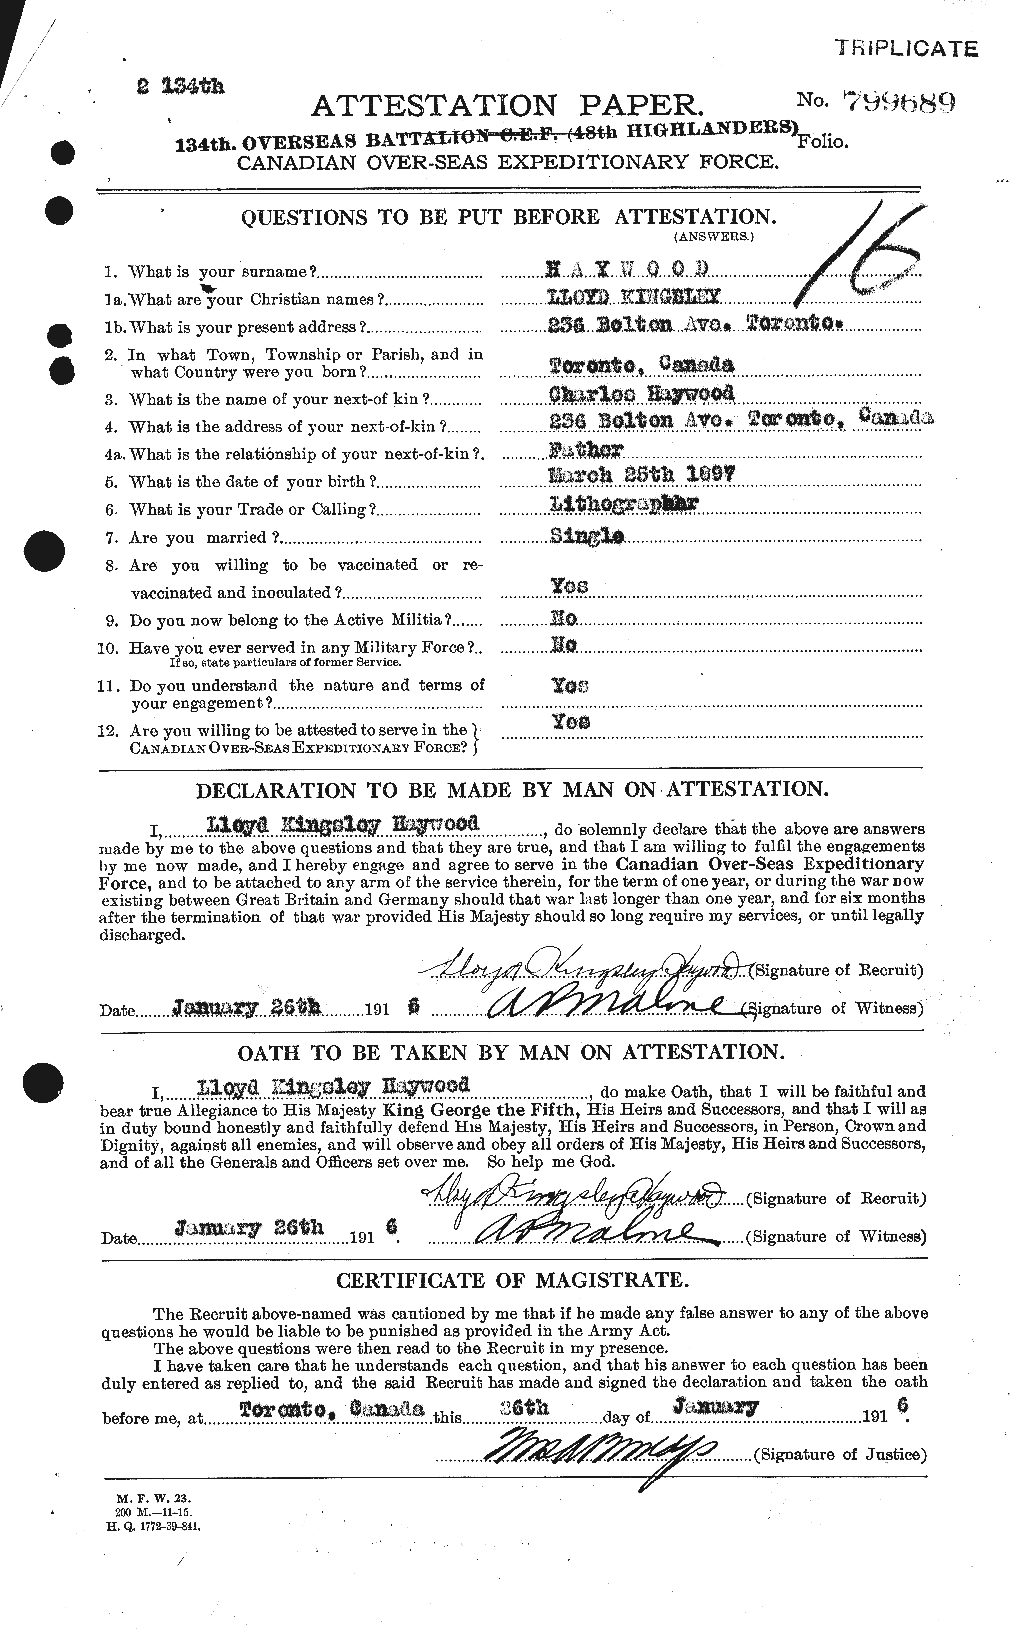 Personnel Records of the First World War - CEF 386002a